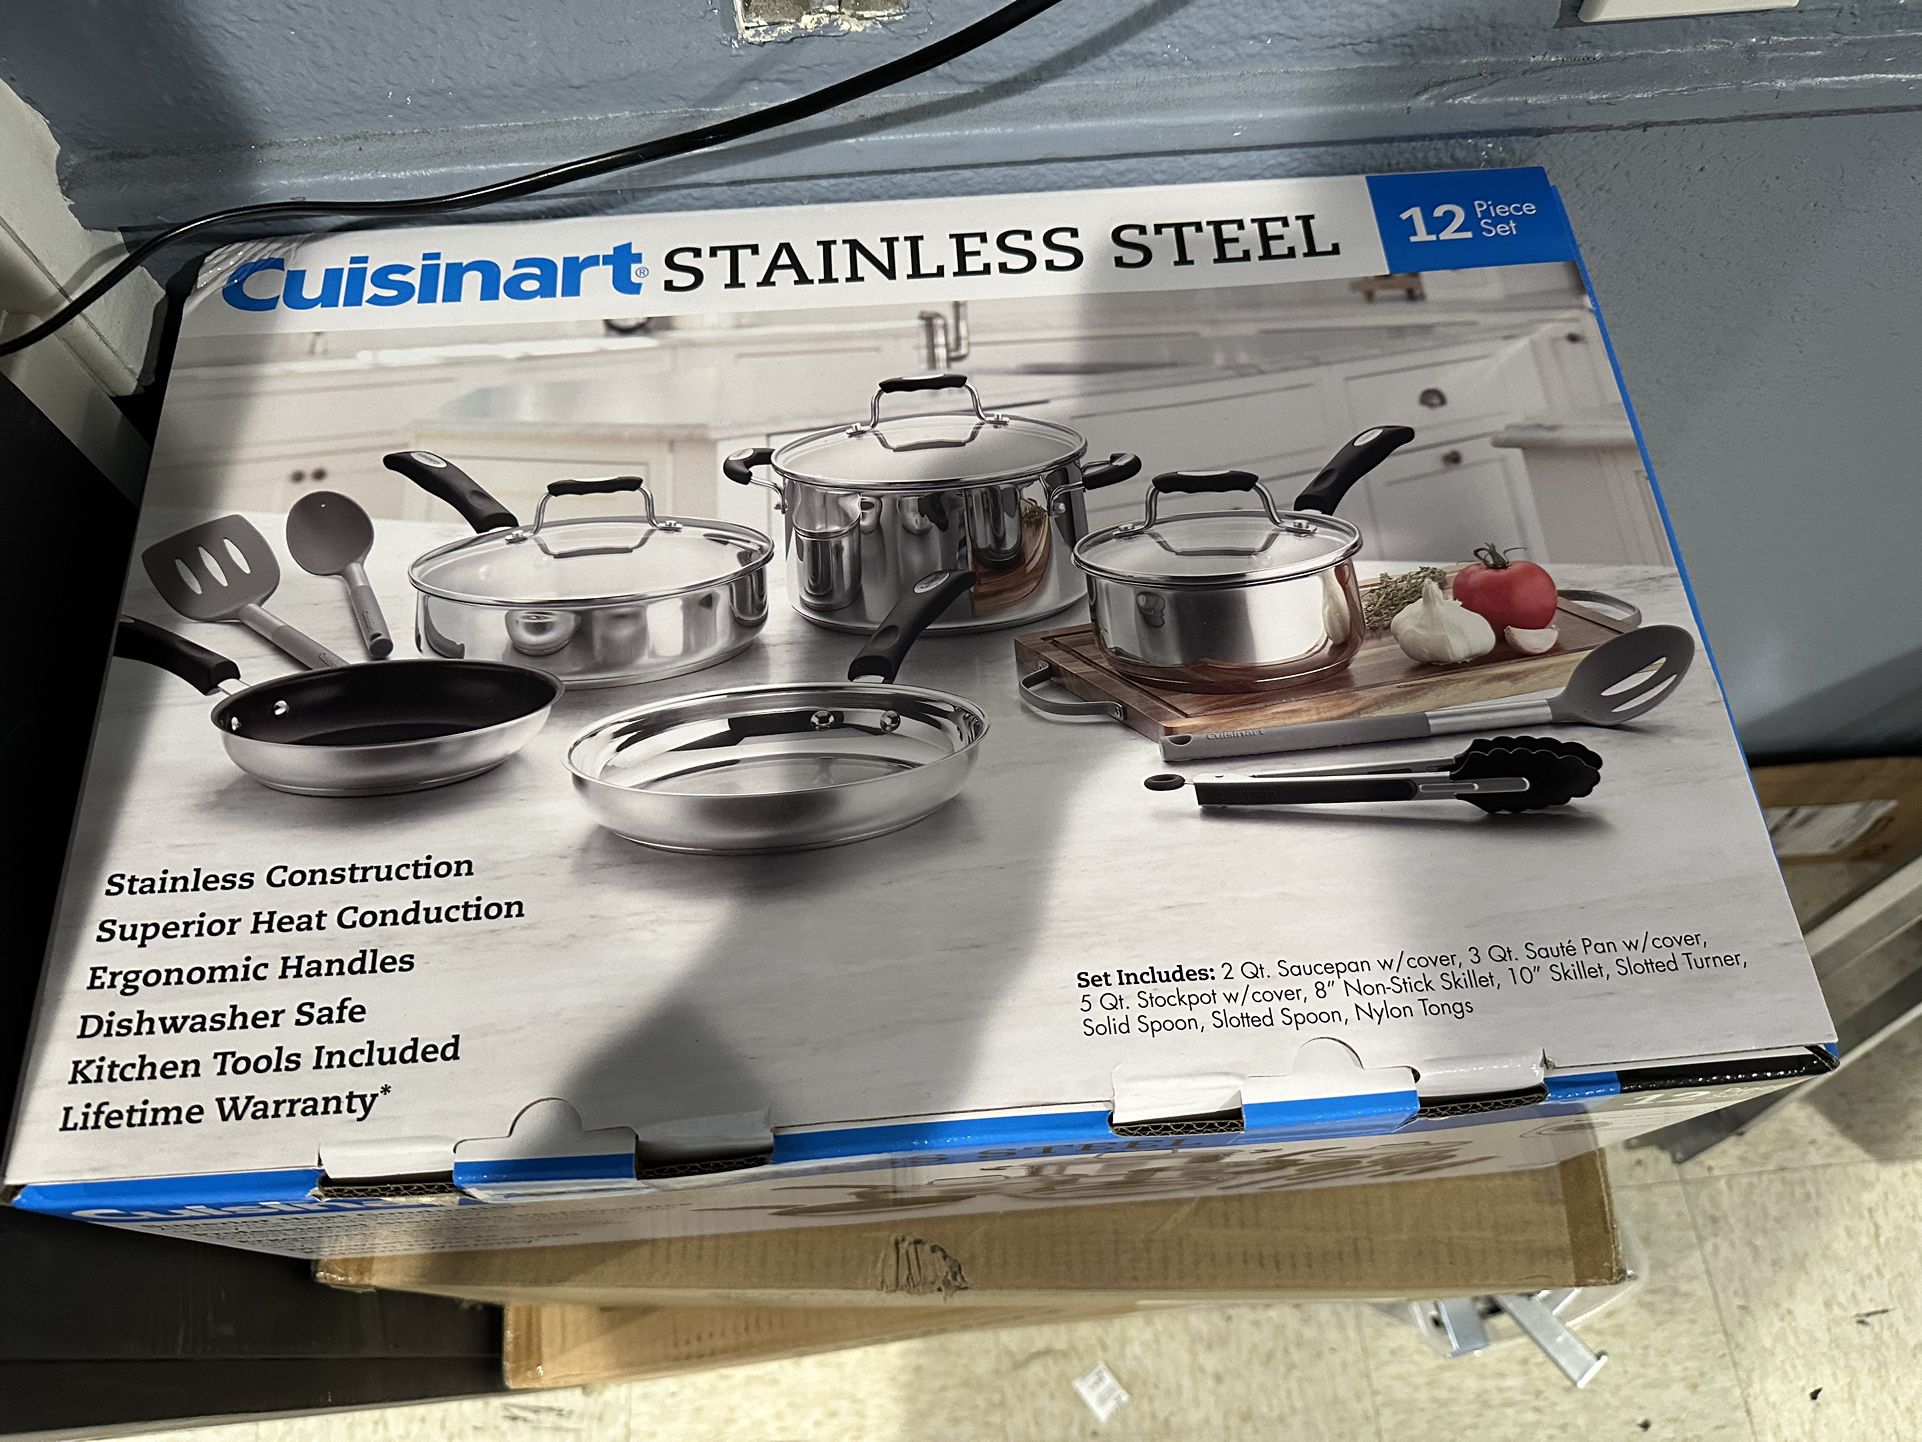 Cuisinart - 12-Piece Cookware Set - Stainless Steel for Sale in